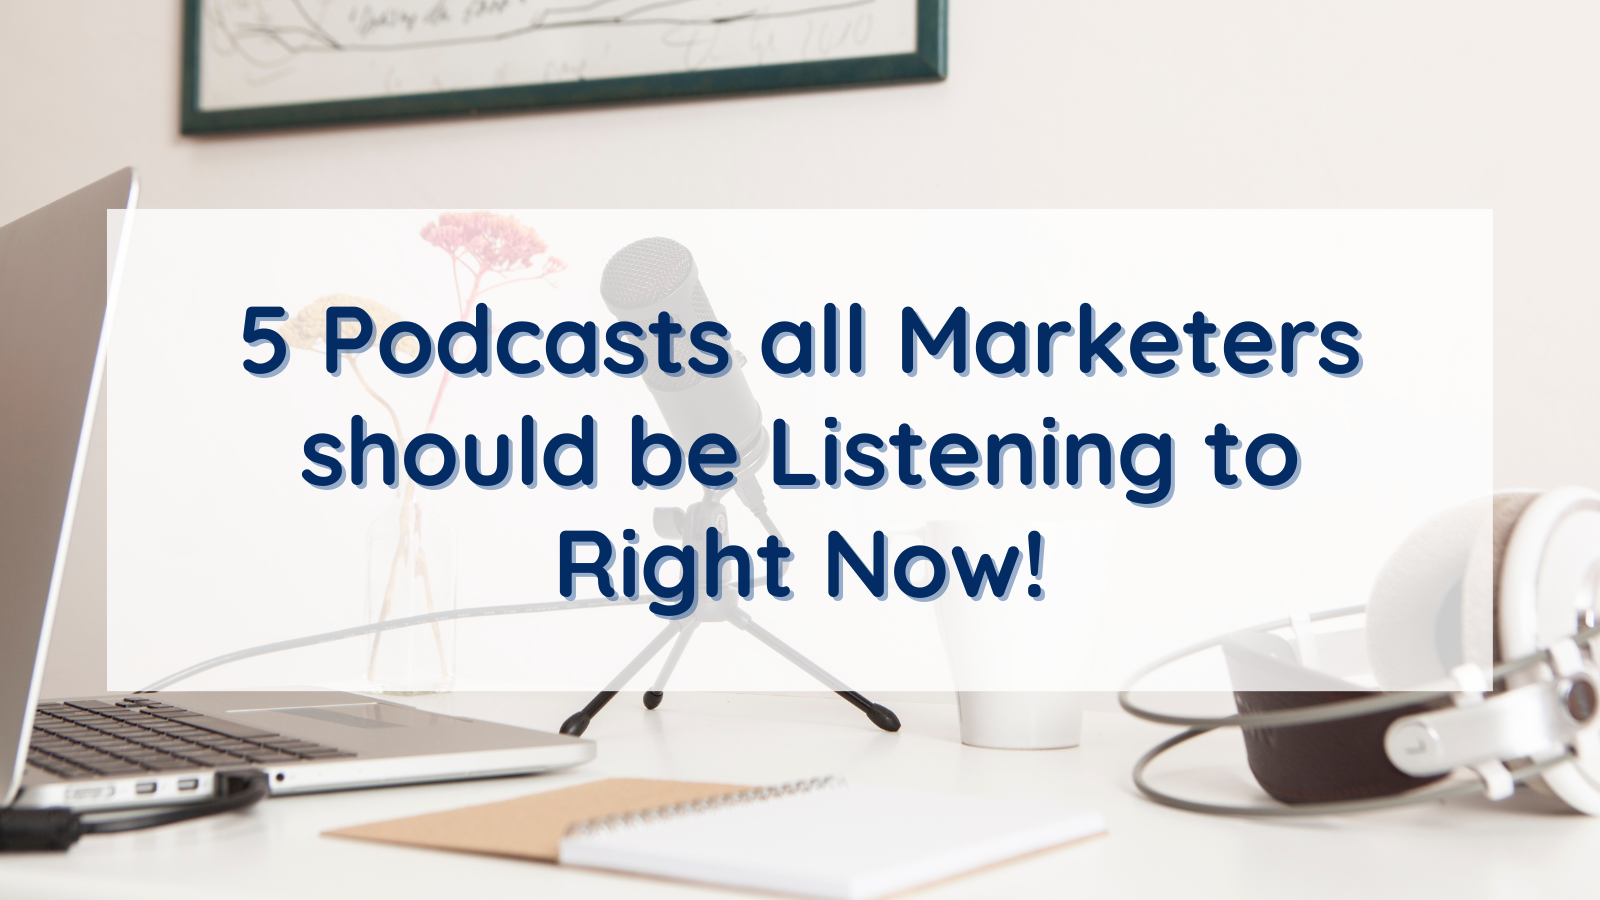 5 Podcasts all Marketers should be listening to Right Now! - Featured